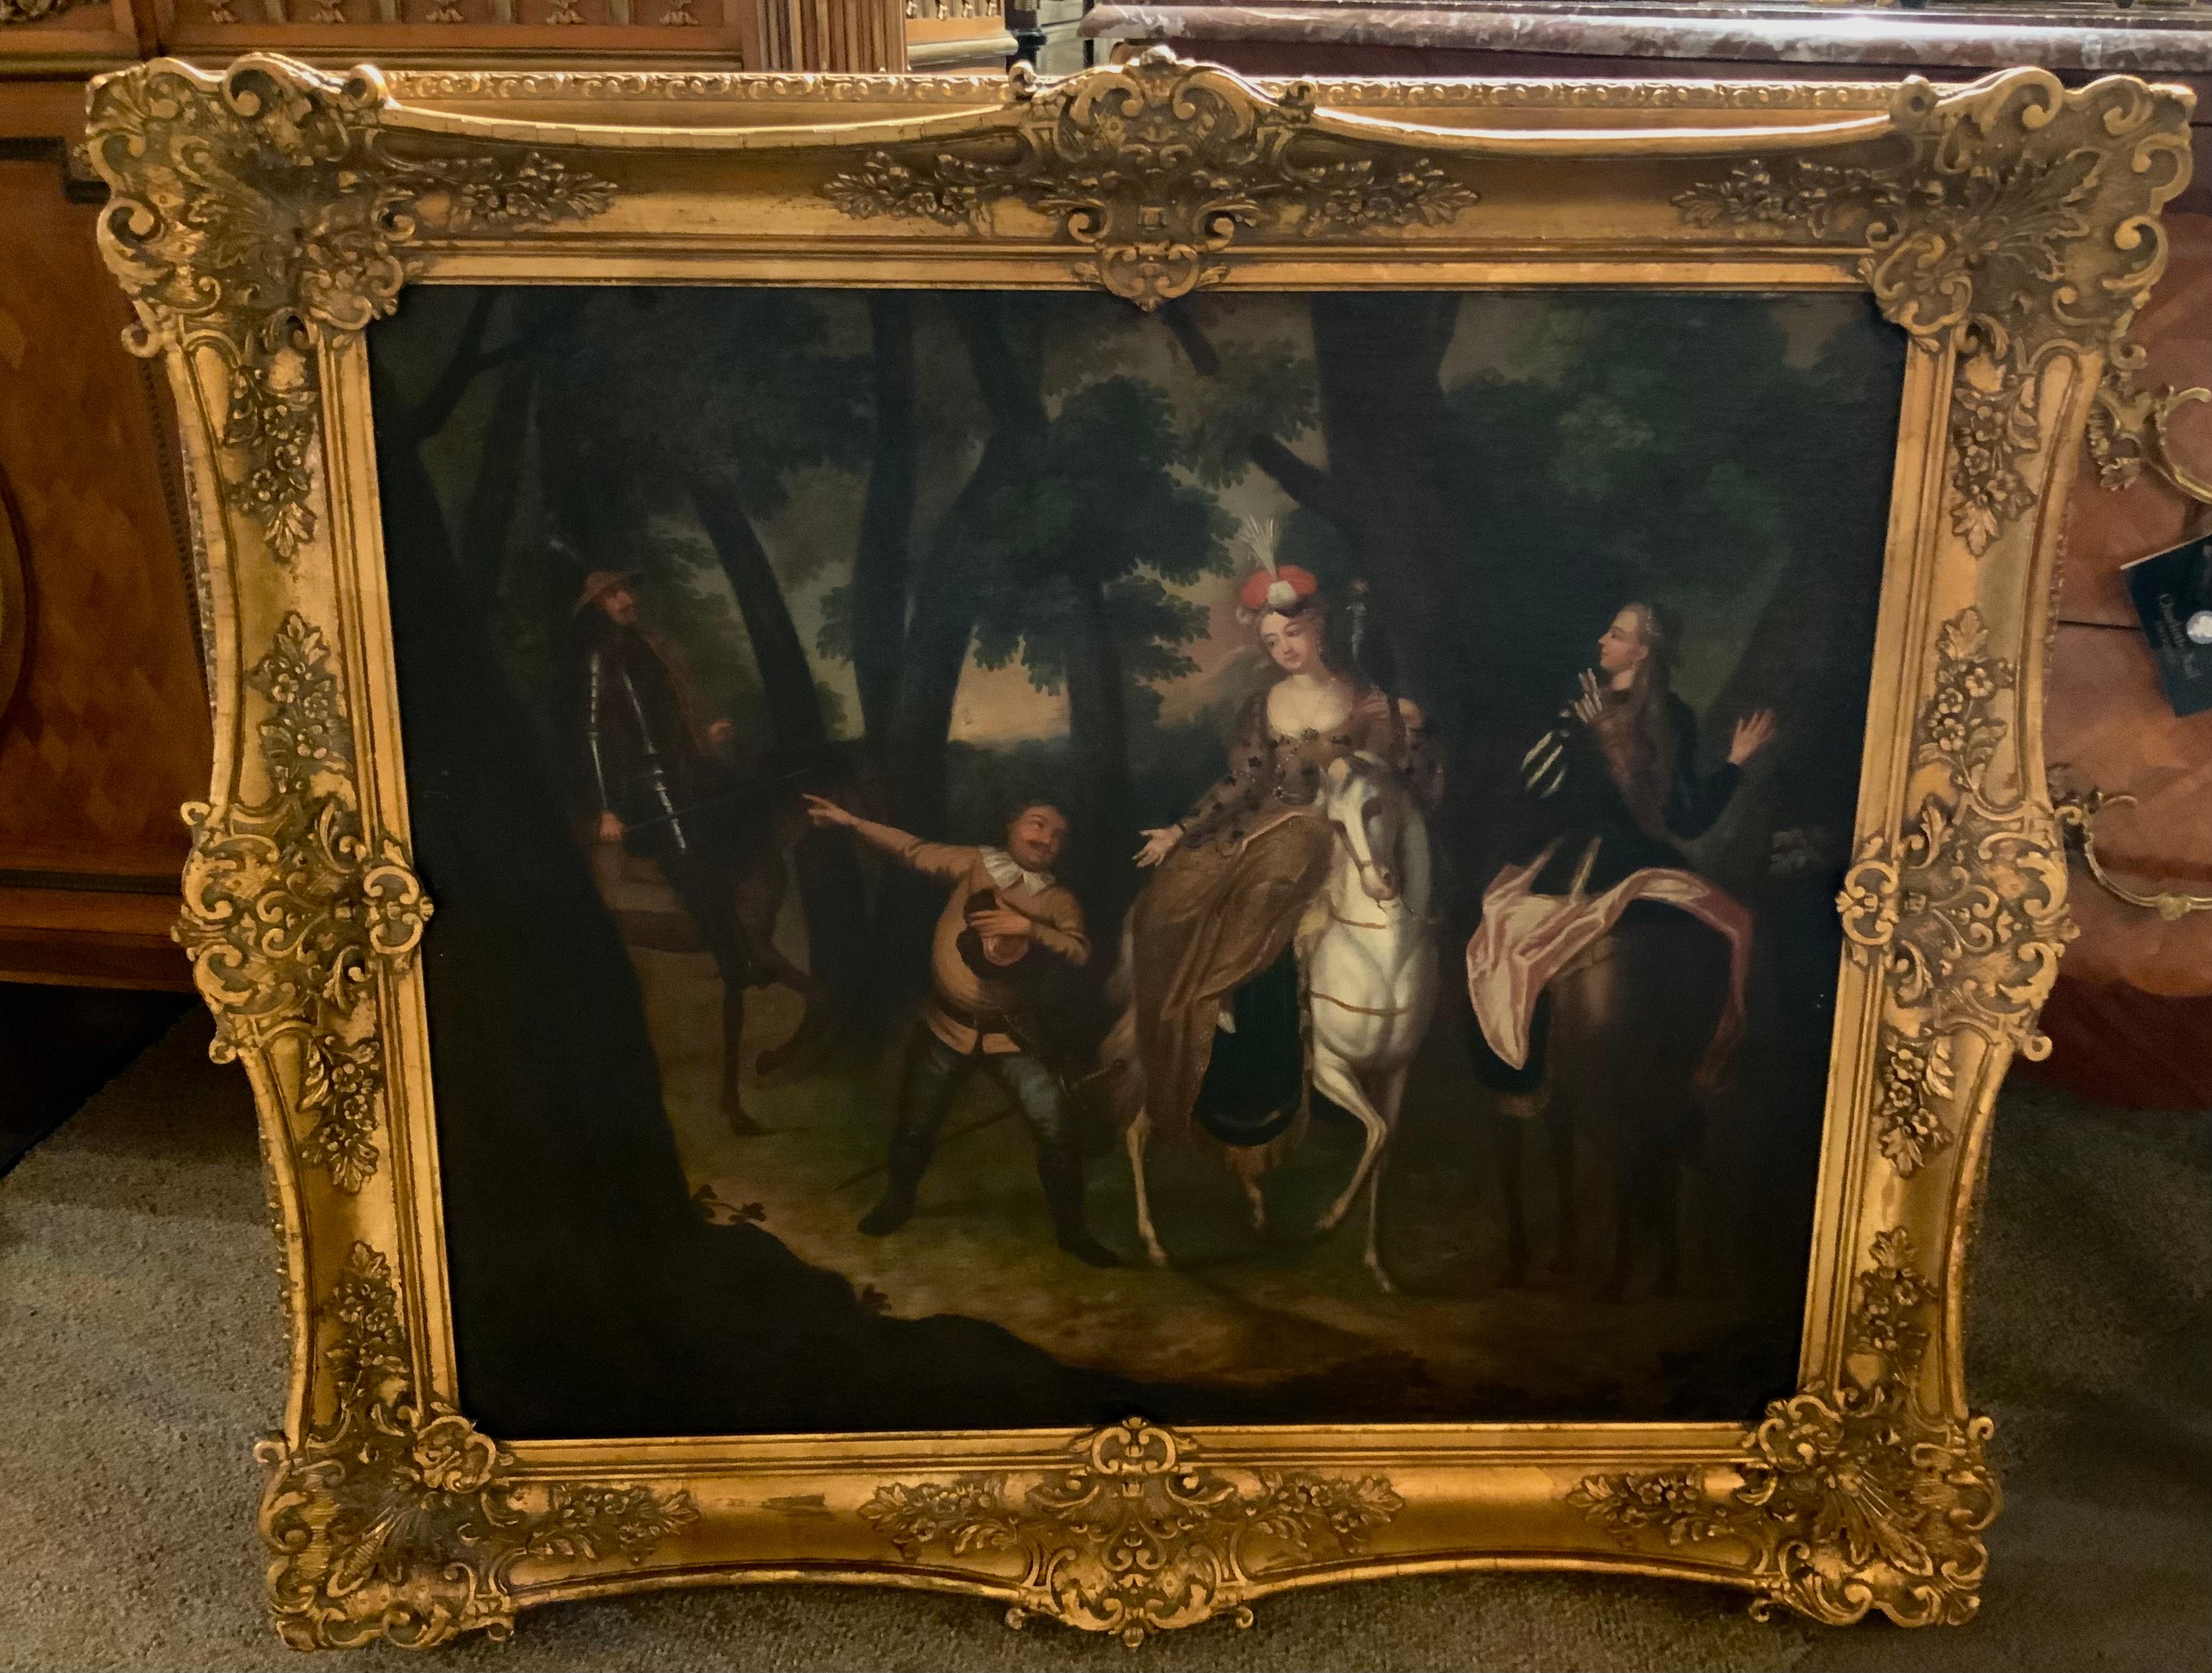 A fine gilt frame surrounds this antique oil painting depicting 
The story of Don Quixote, Sancho Panza Sent by Don Quixote
To the Duchess. It is French circa 1750 after the artist Charles-Antoine
coypel. The frame is complete and without chips